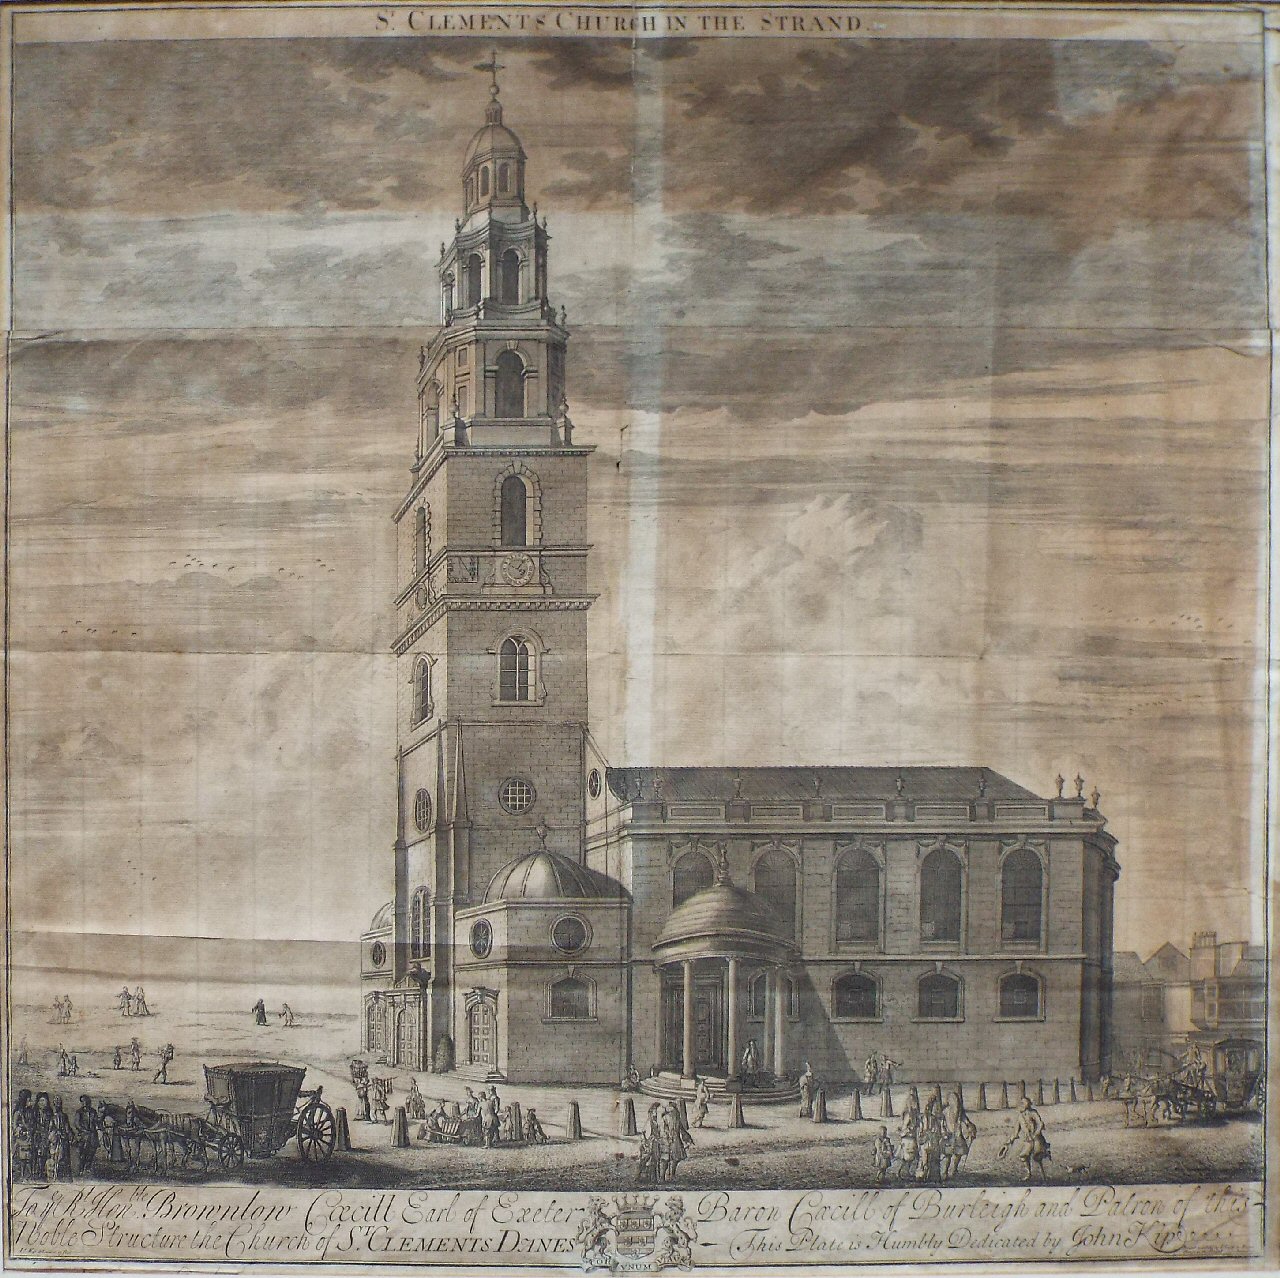 Print - St. Clements Church in the Strand. To the Right Hon.ble John Coecill Earl of Exeter Baron Coecill of Burleigh and Patron of this Noble Structure the Church of St. Clements Danes This Plate is Humbly Dedicated by John Kip - Kip